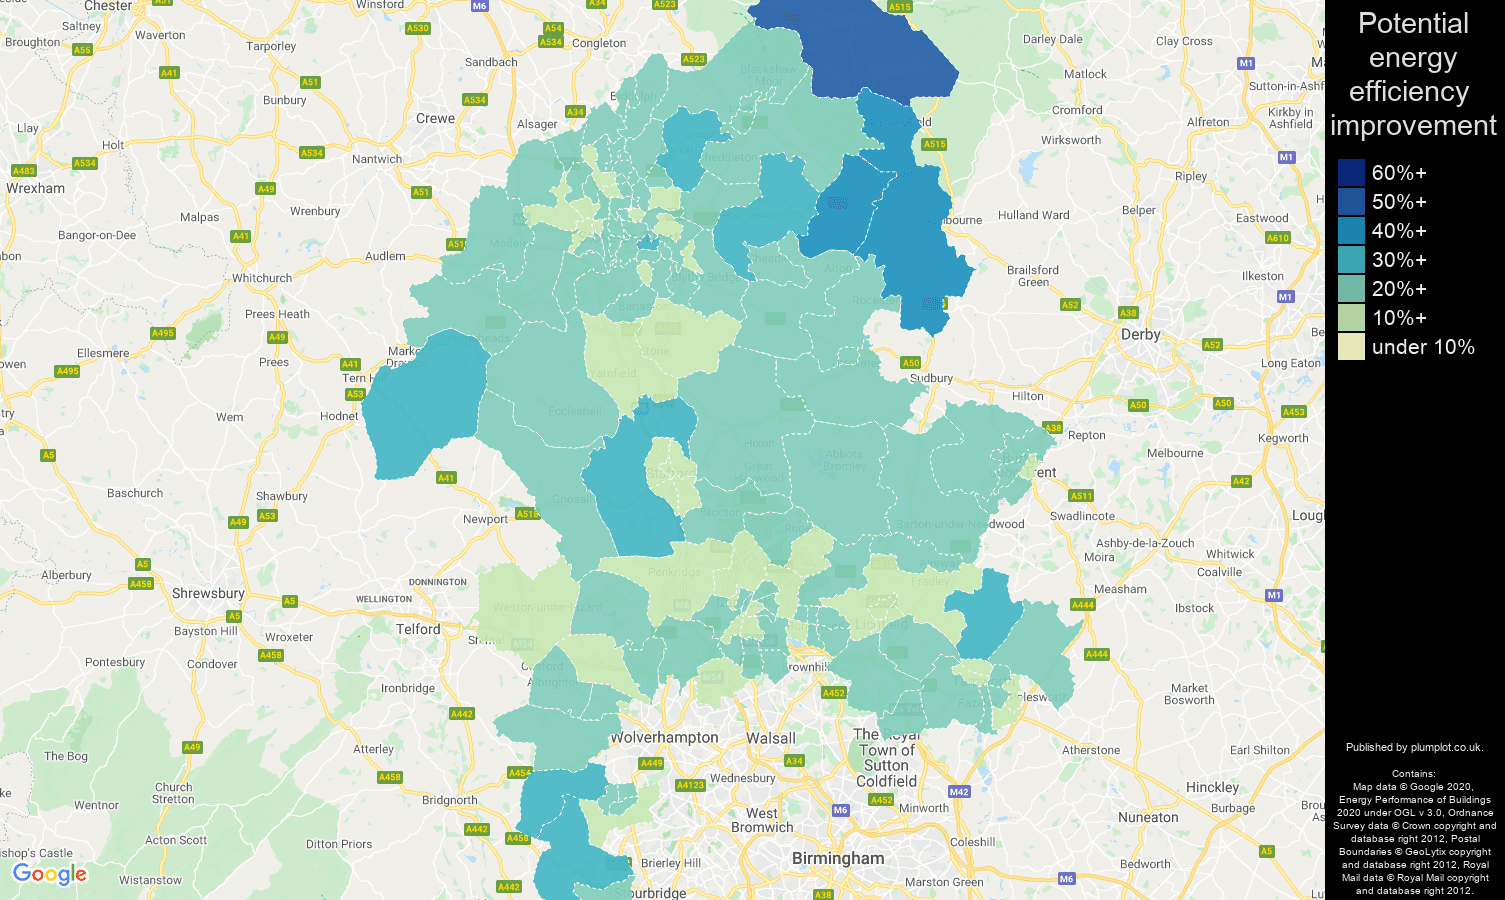 Staffordshire map of potential energy efficiency improvement of properties